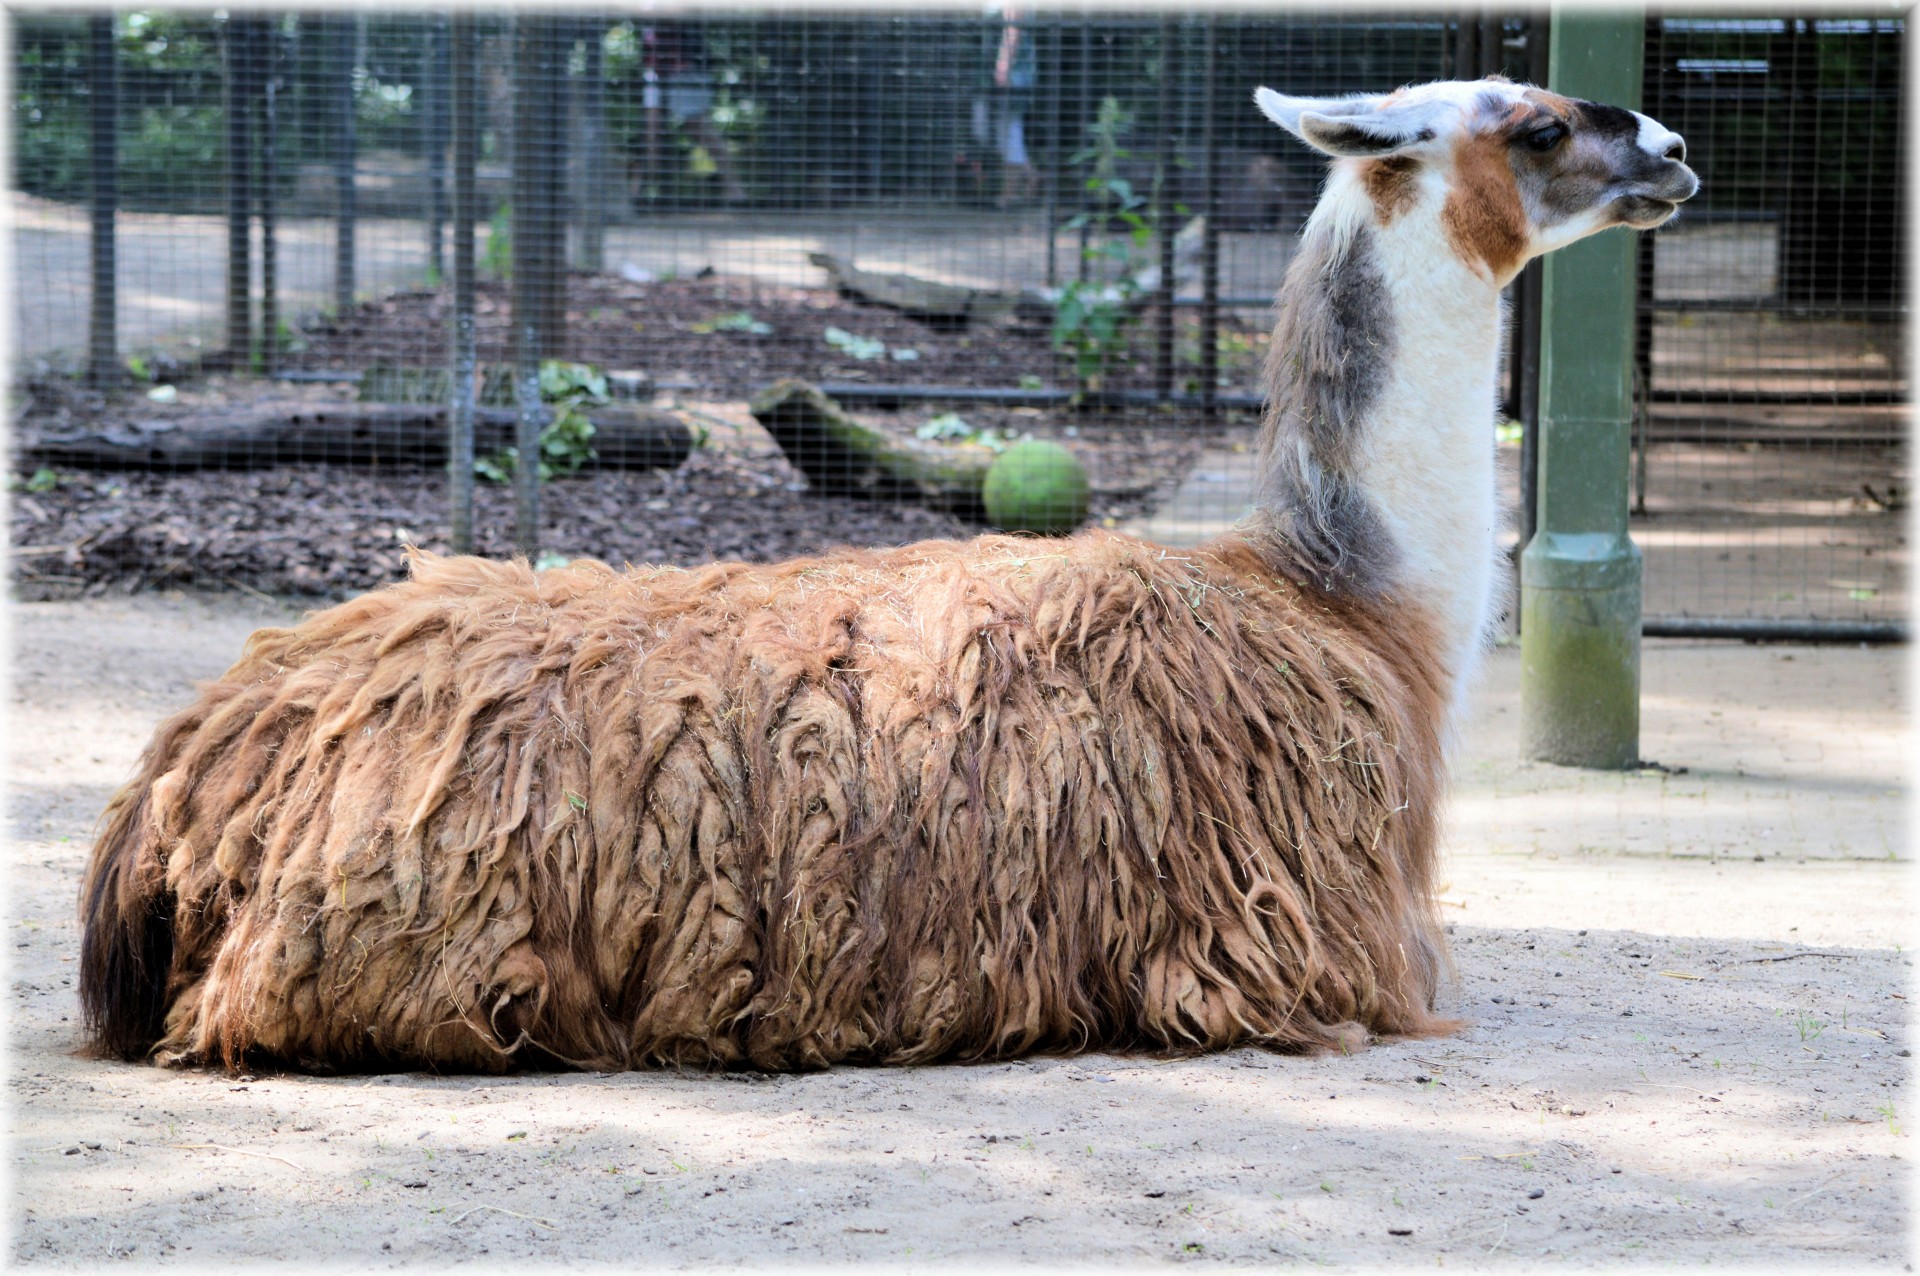 the-llama-05-free-stock-photo-public-domain-pictures